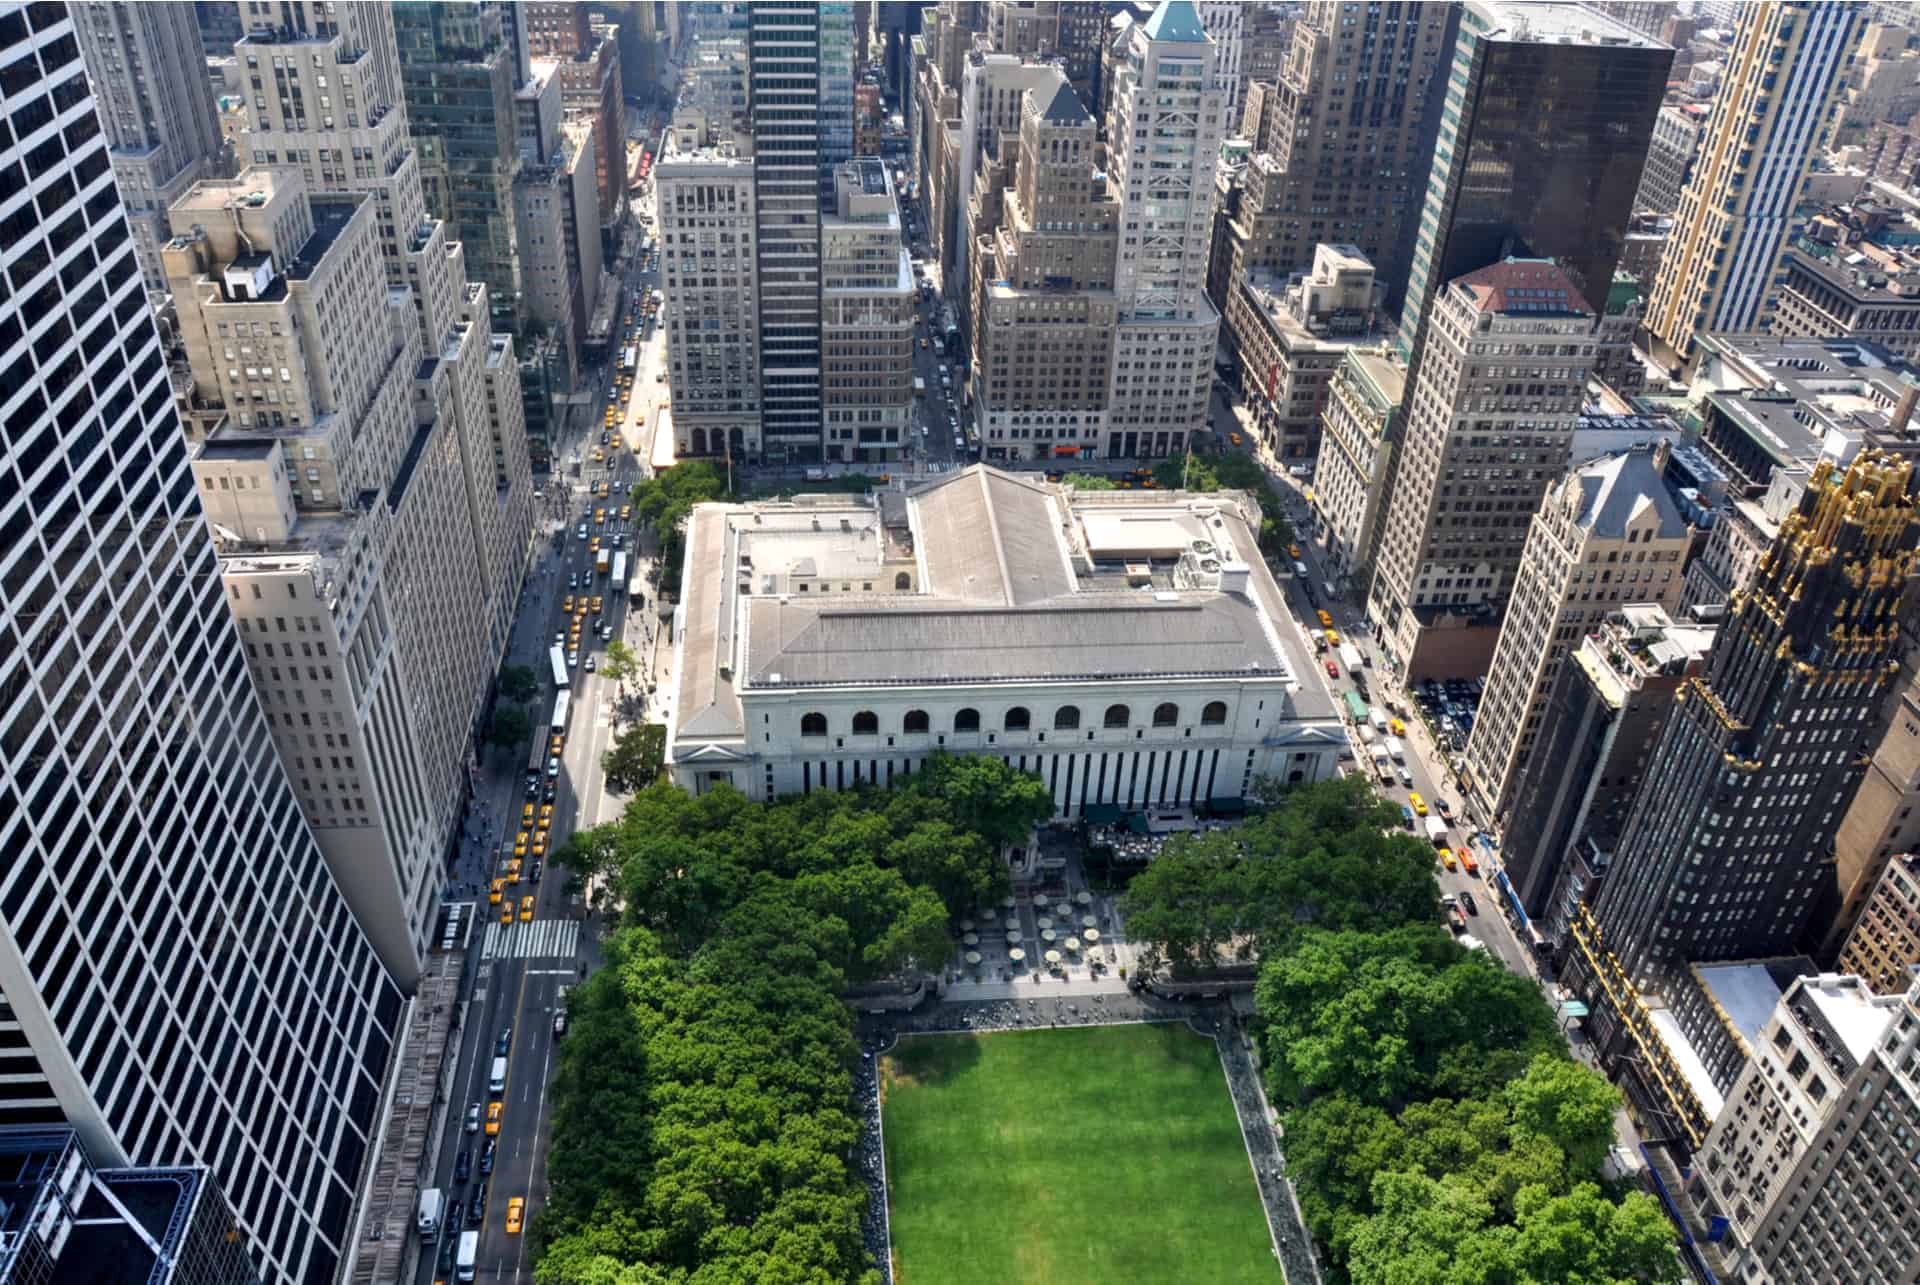 where is bryant park located in manhattan